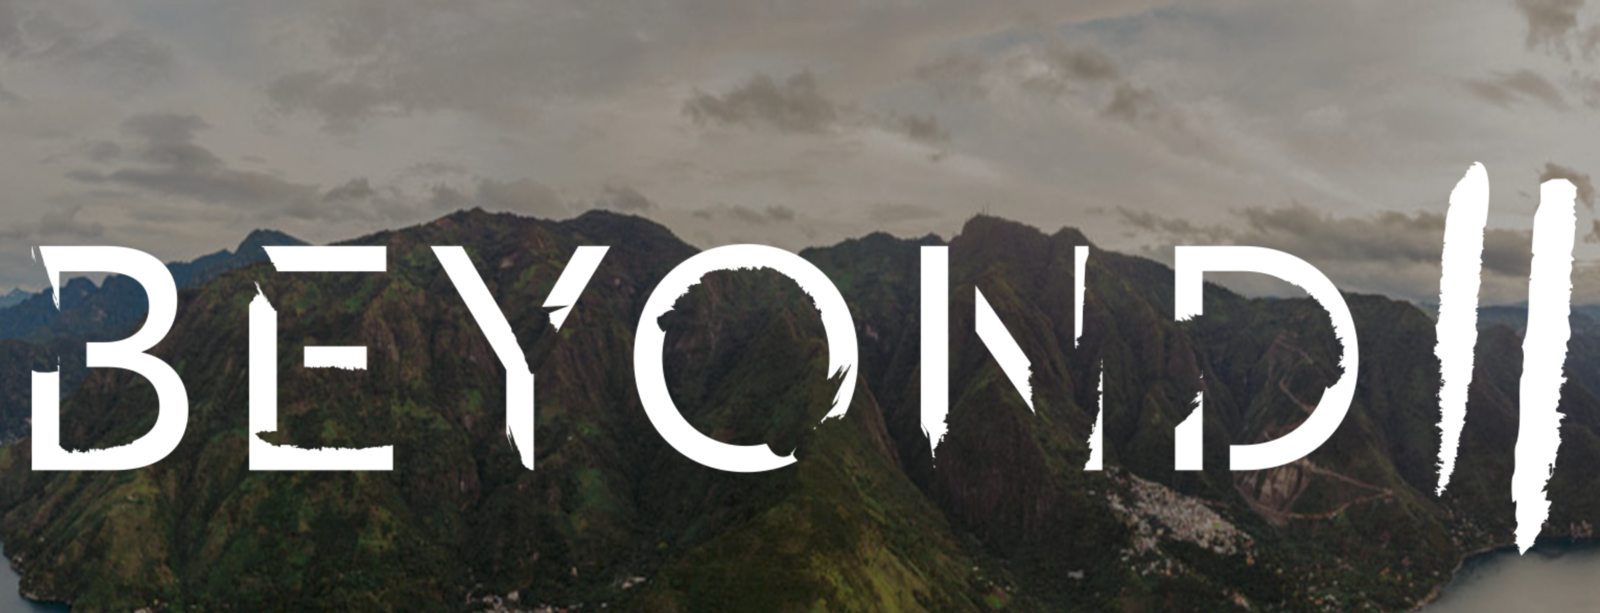 IU C&I Studios Page and Post The Role of Typography in Logo Design White Beyond II logo against mountain backdrop